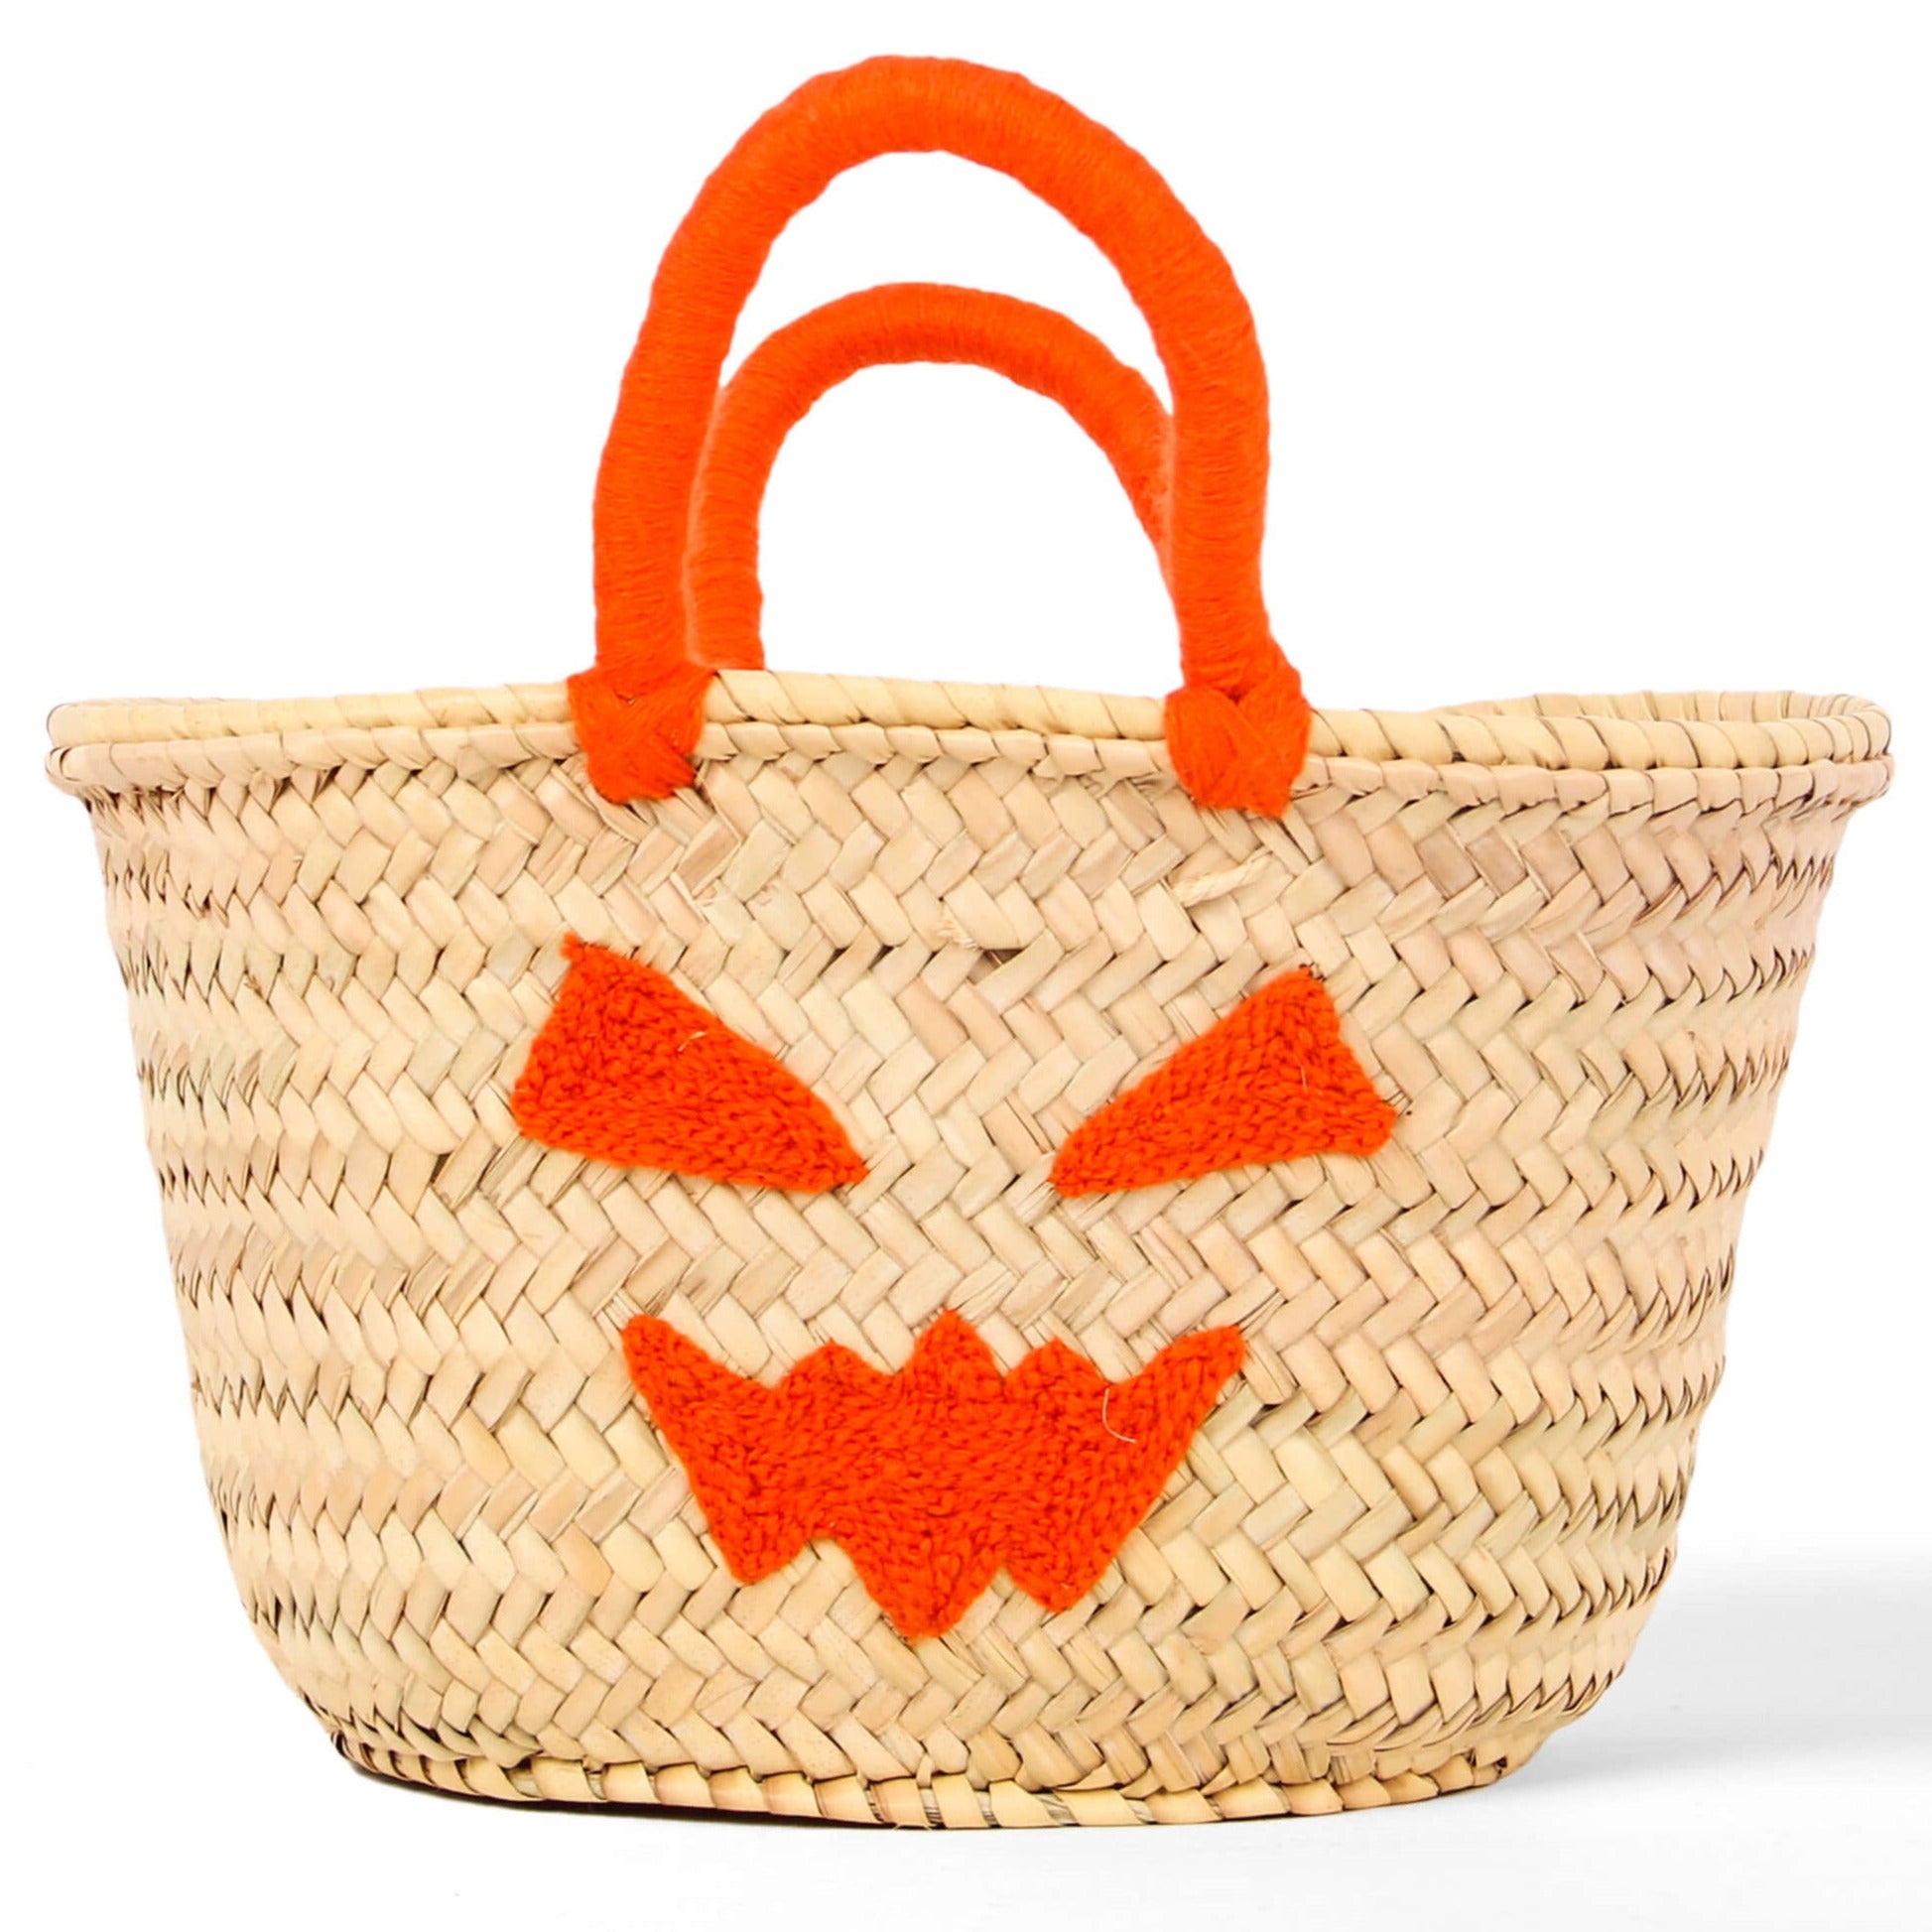 Boo ! Personalized Halloween Trick or Treat Bag - Pumpkin Small Straw Basket Personalized Halloween Bucket and Candy Tote for Kids Gift - Oval Straw Bag Personalized Monogram Halloween Basket Gifts for Kids 